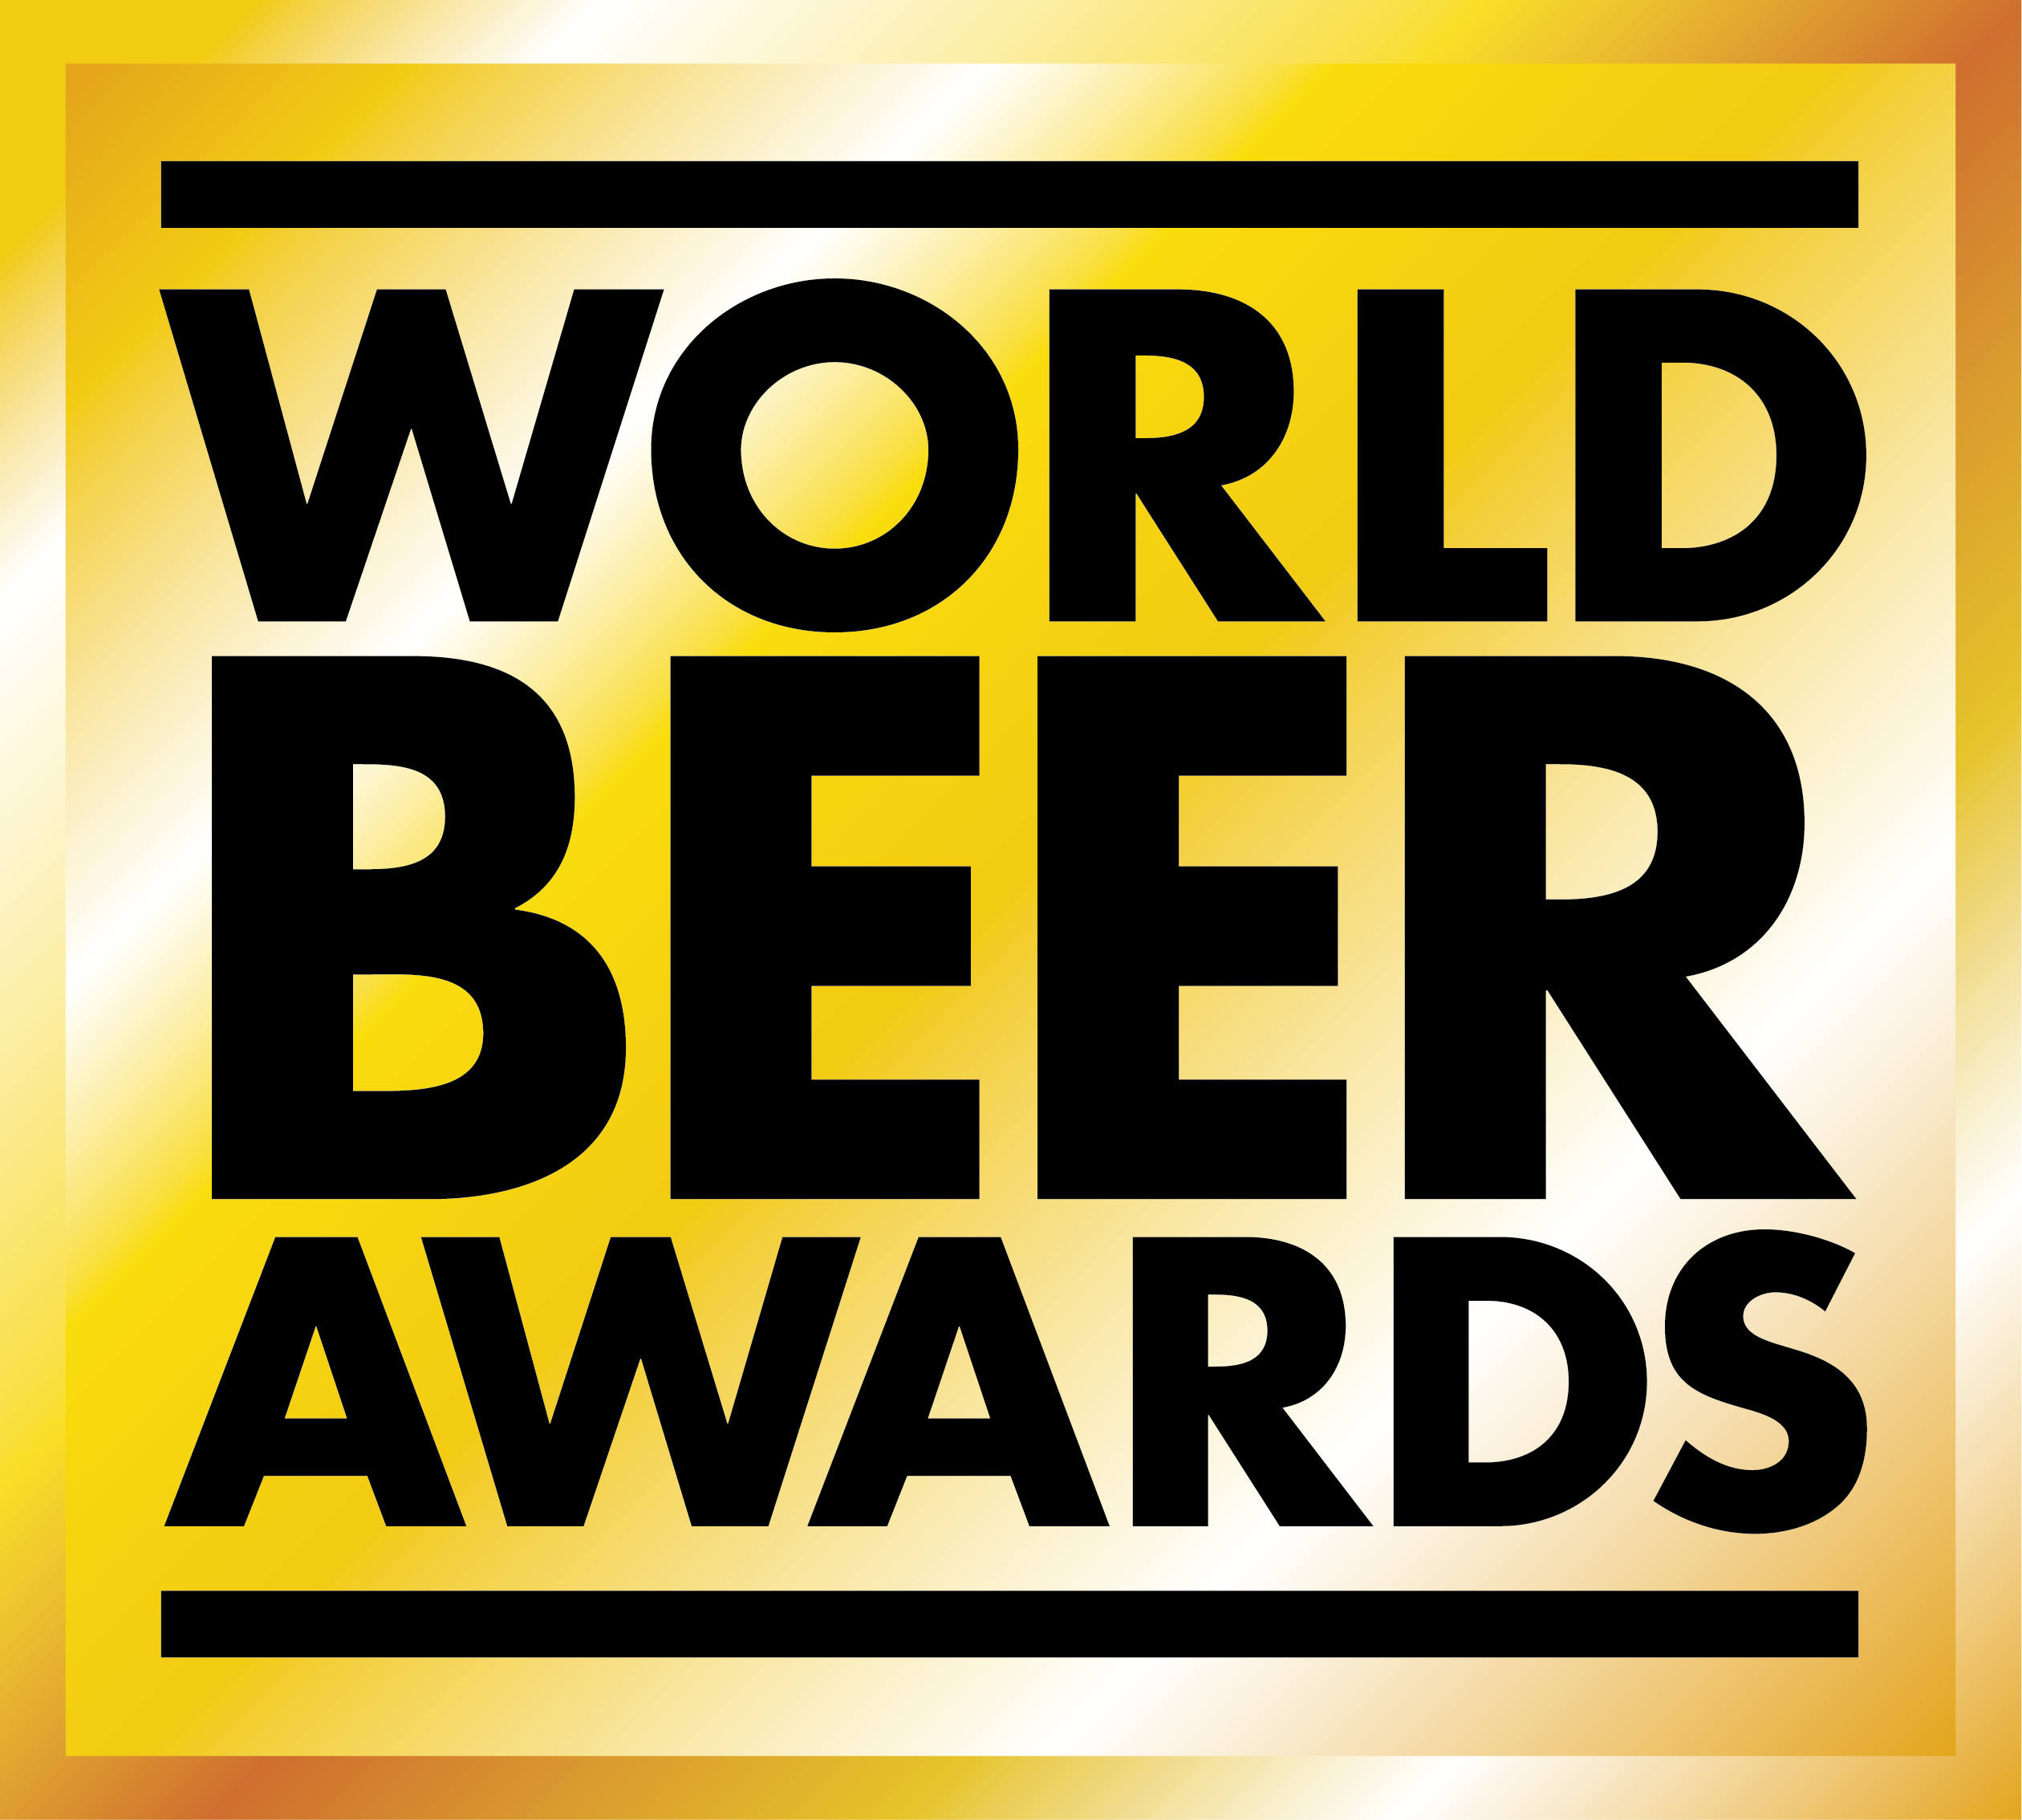 a new Corporate Member to the Guild World Beer Awards The